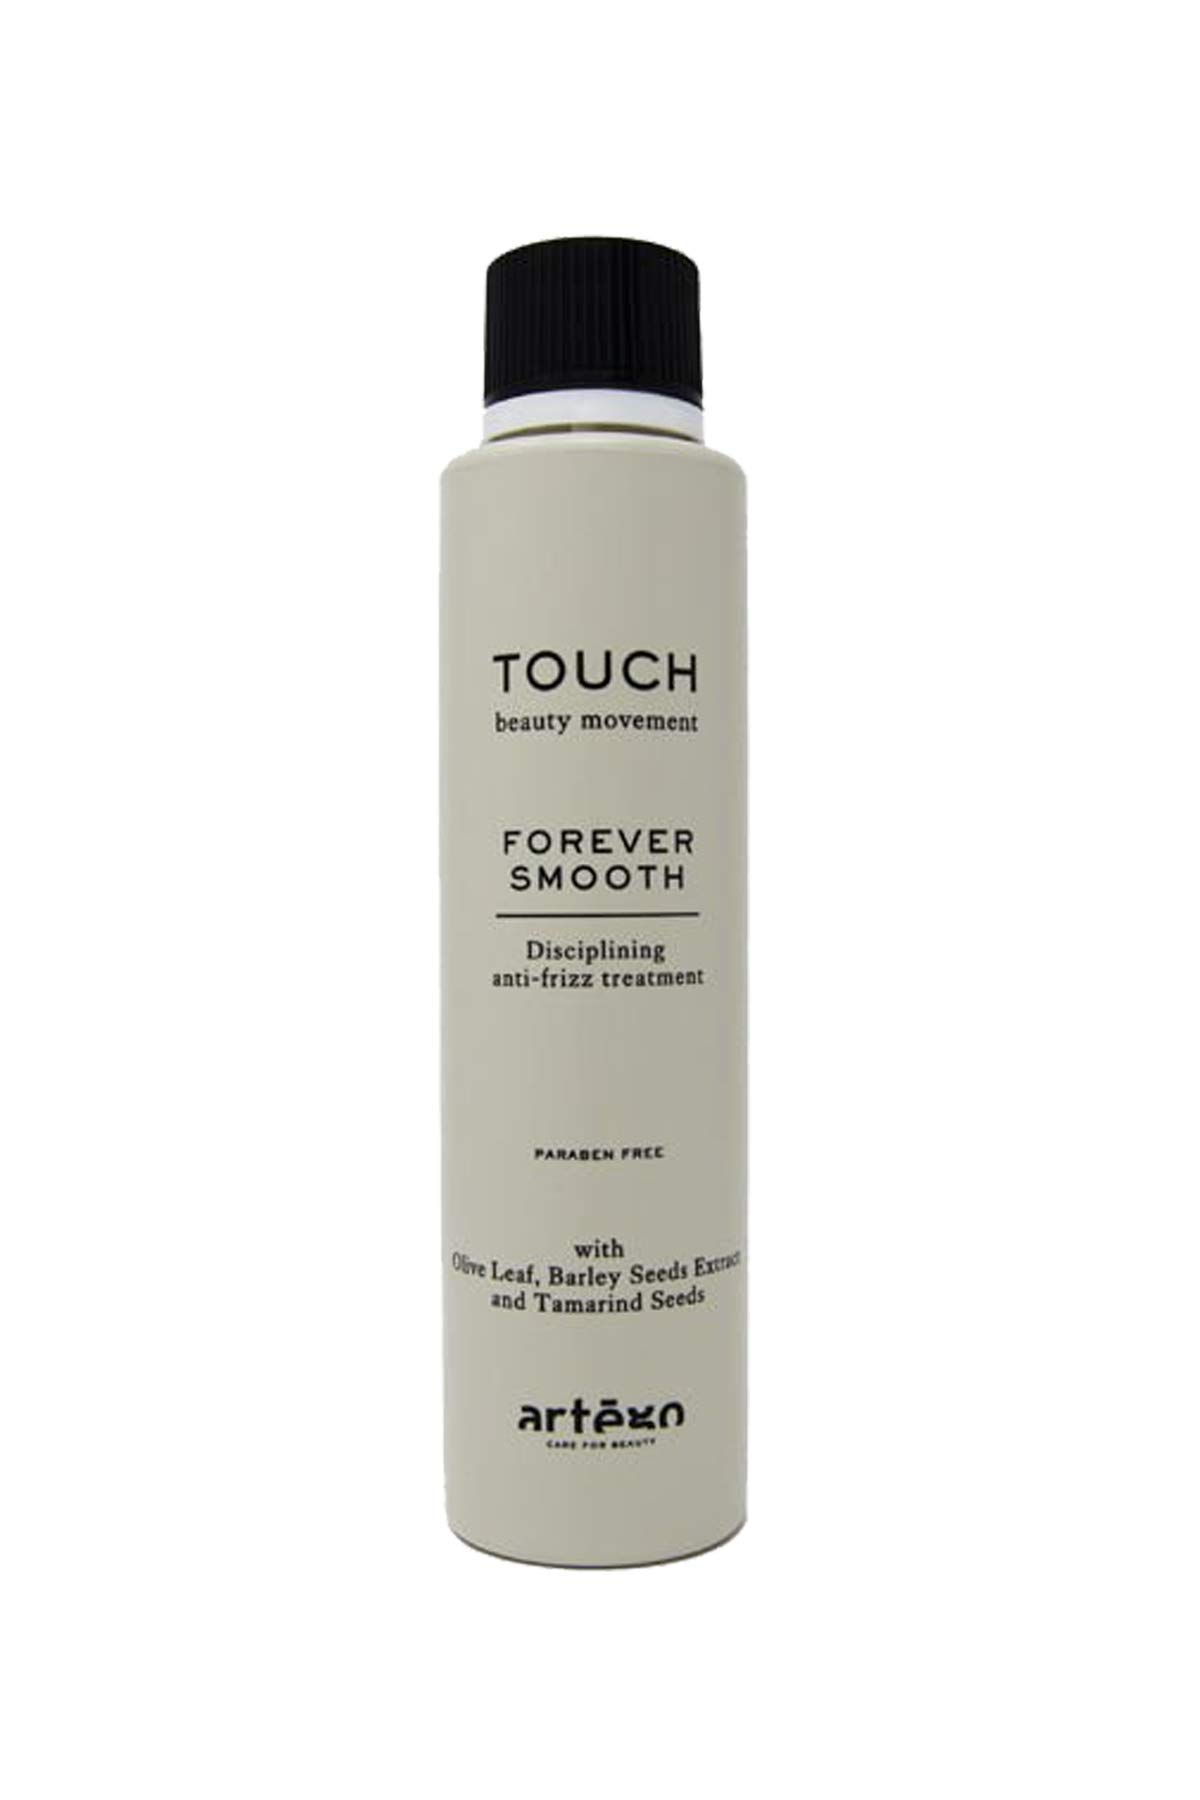 ART TOUCH FOREVER SMOOTH 250 ml